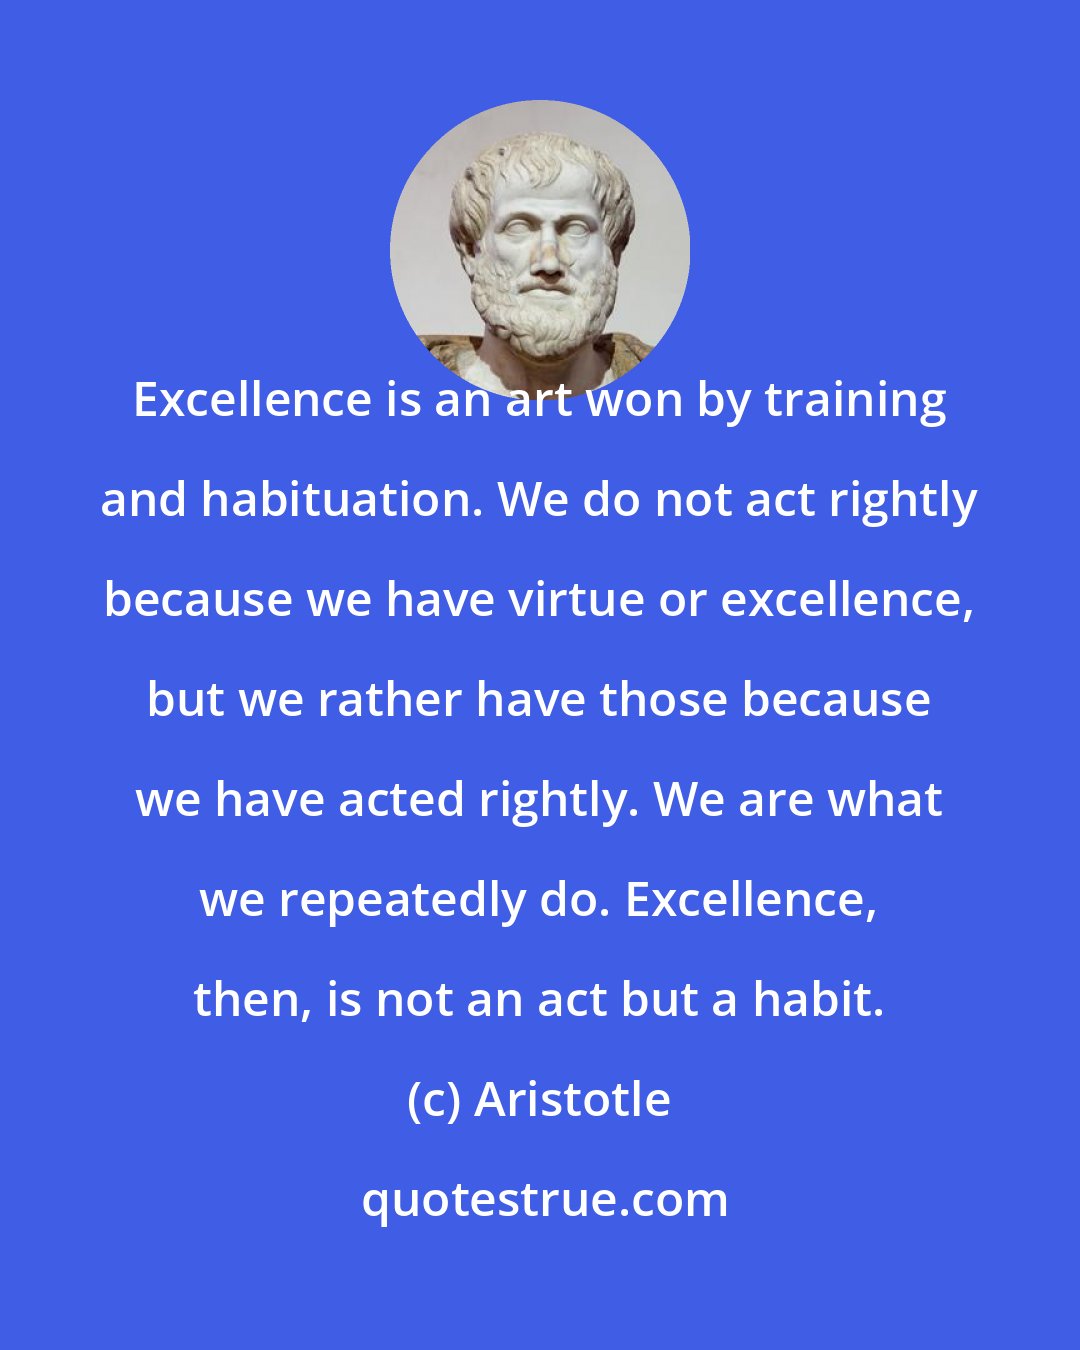 Aristotle: Excellence is an art won by training and habituation. We do not act rightly because we have virtue or excellence, but we rather have those because we have acted rightly. We are what we repeatedly do. Excellence, then, is not an act but a habit.